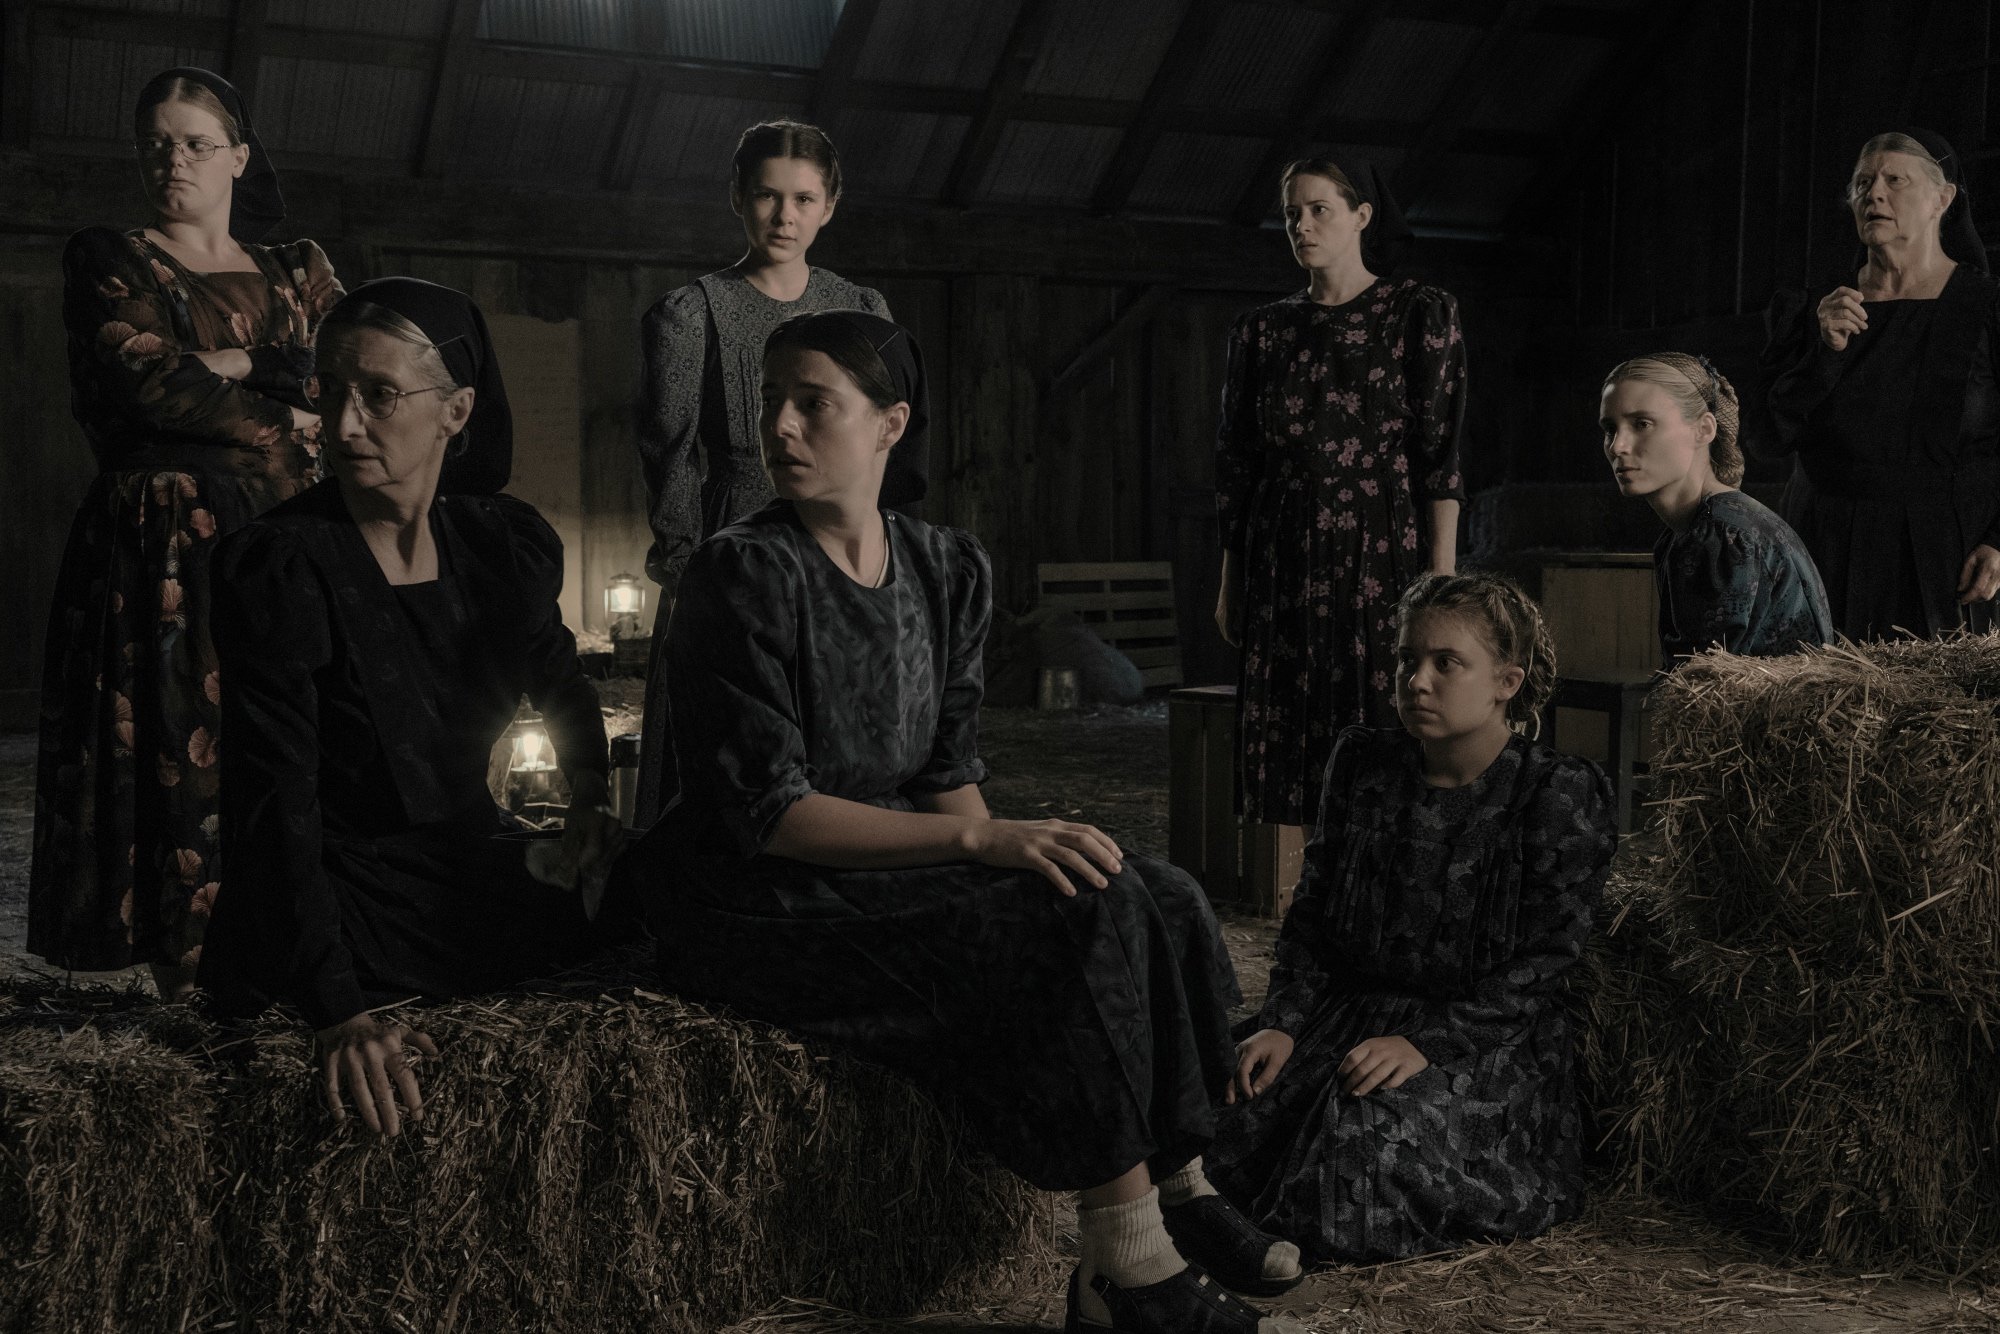 'Women Talking' Michelle McLeod stars as Mejal, Sheila McCarthy as Greta, Liv McNeil as Neitje, Jessie Buckley as Mariche, Claire Foy as Salome, Kate Hallett as Autje, Rooney Mara as Ona and Judith Ivey as Agata in a barn sitting around haystacks looking surprised